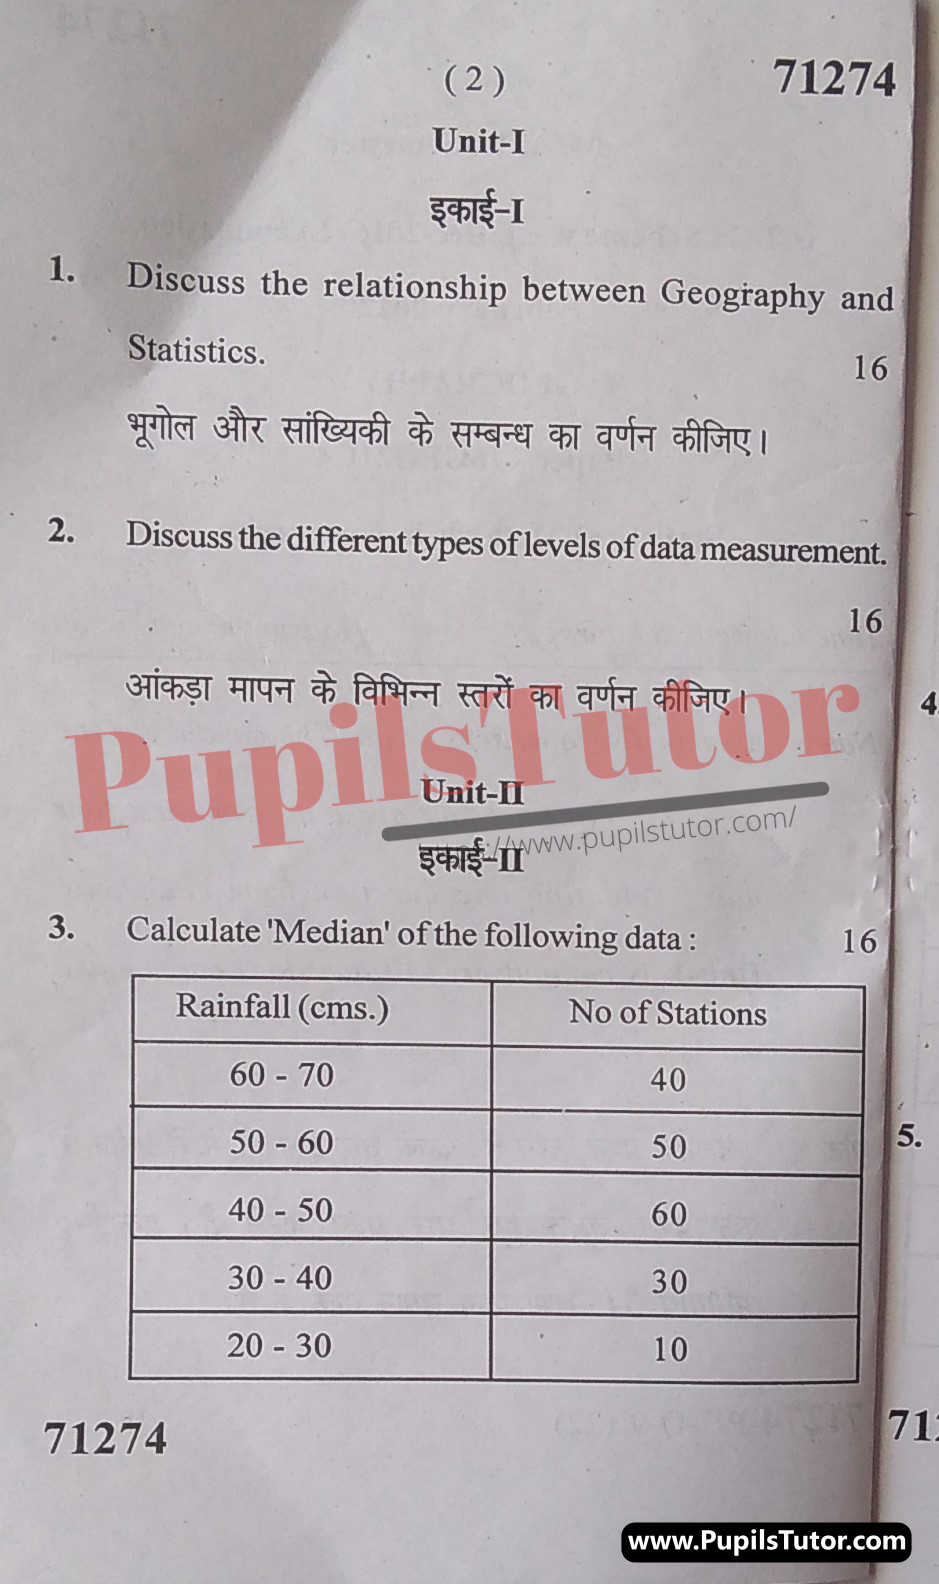 M.D. University M.A. [Geography] Statistical Methods In Geography First Semester Important Question Answer And Solution - www.pupilstutor.com (Paper Page Number 2)